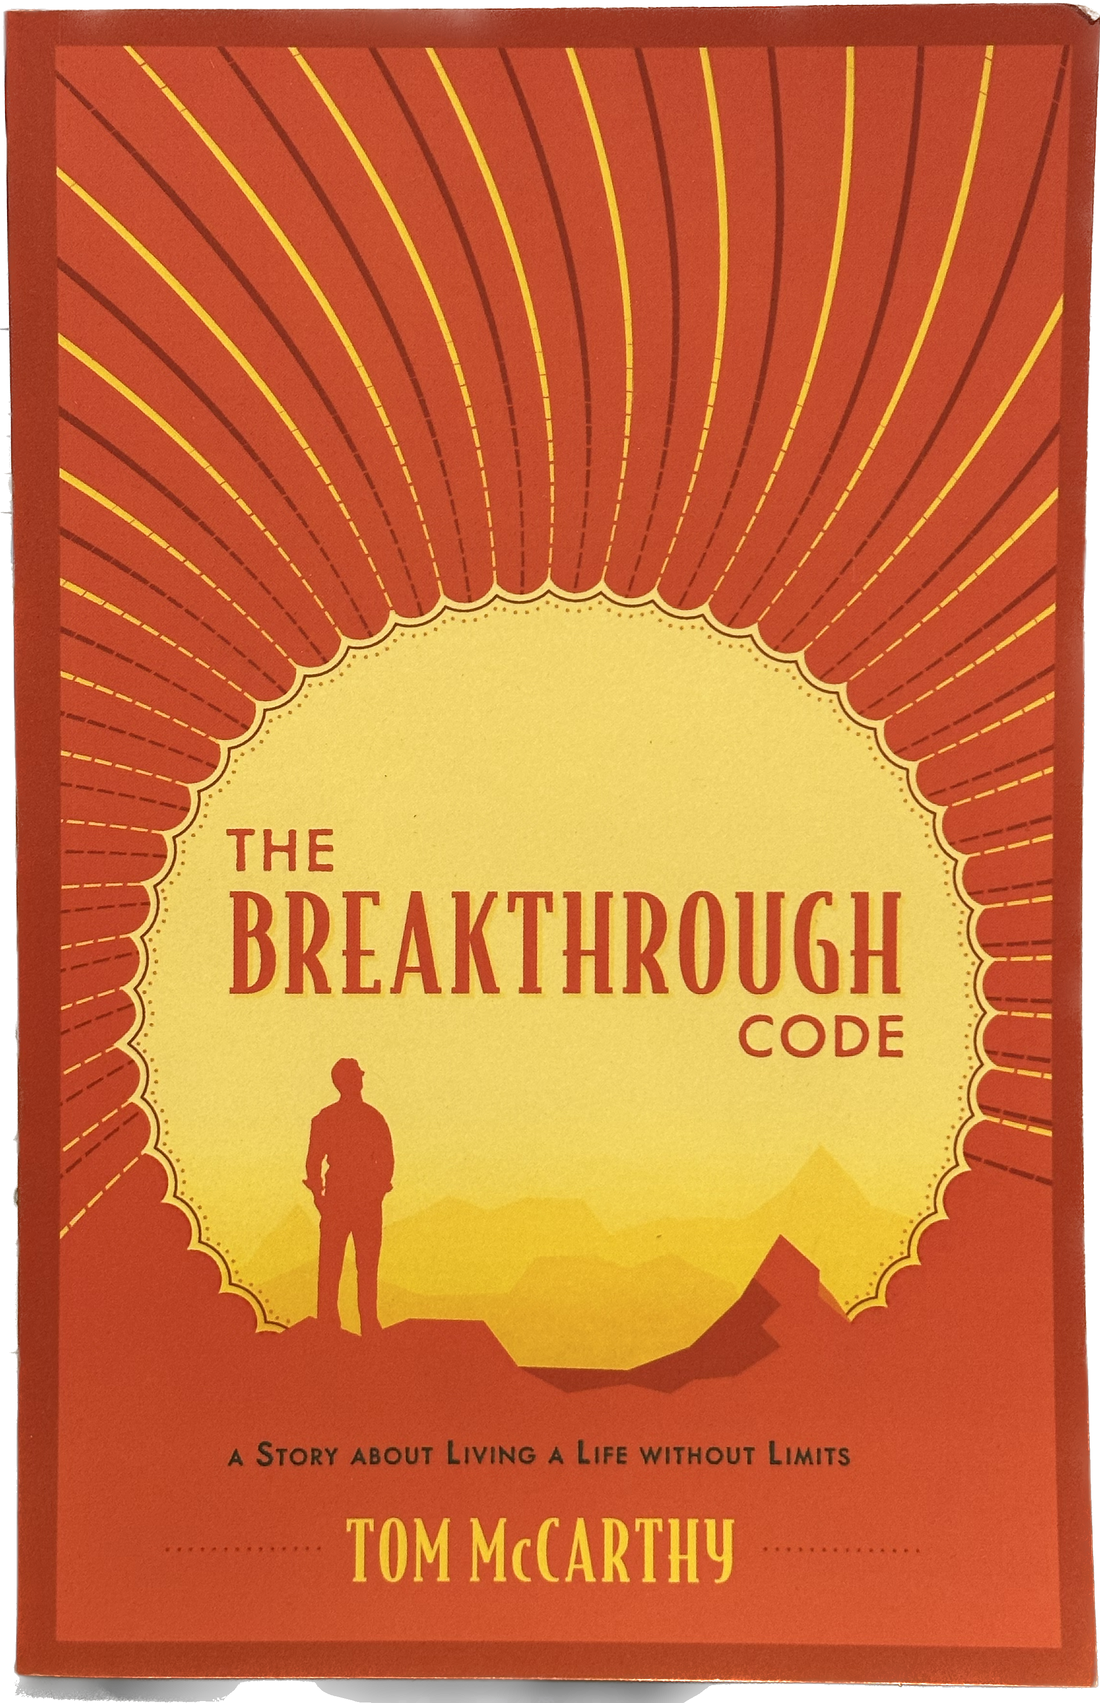 BOOK - The Breakthrough Code by Tom McCarthy